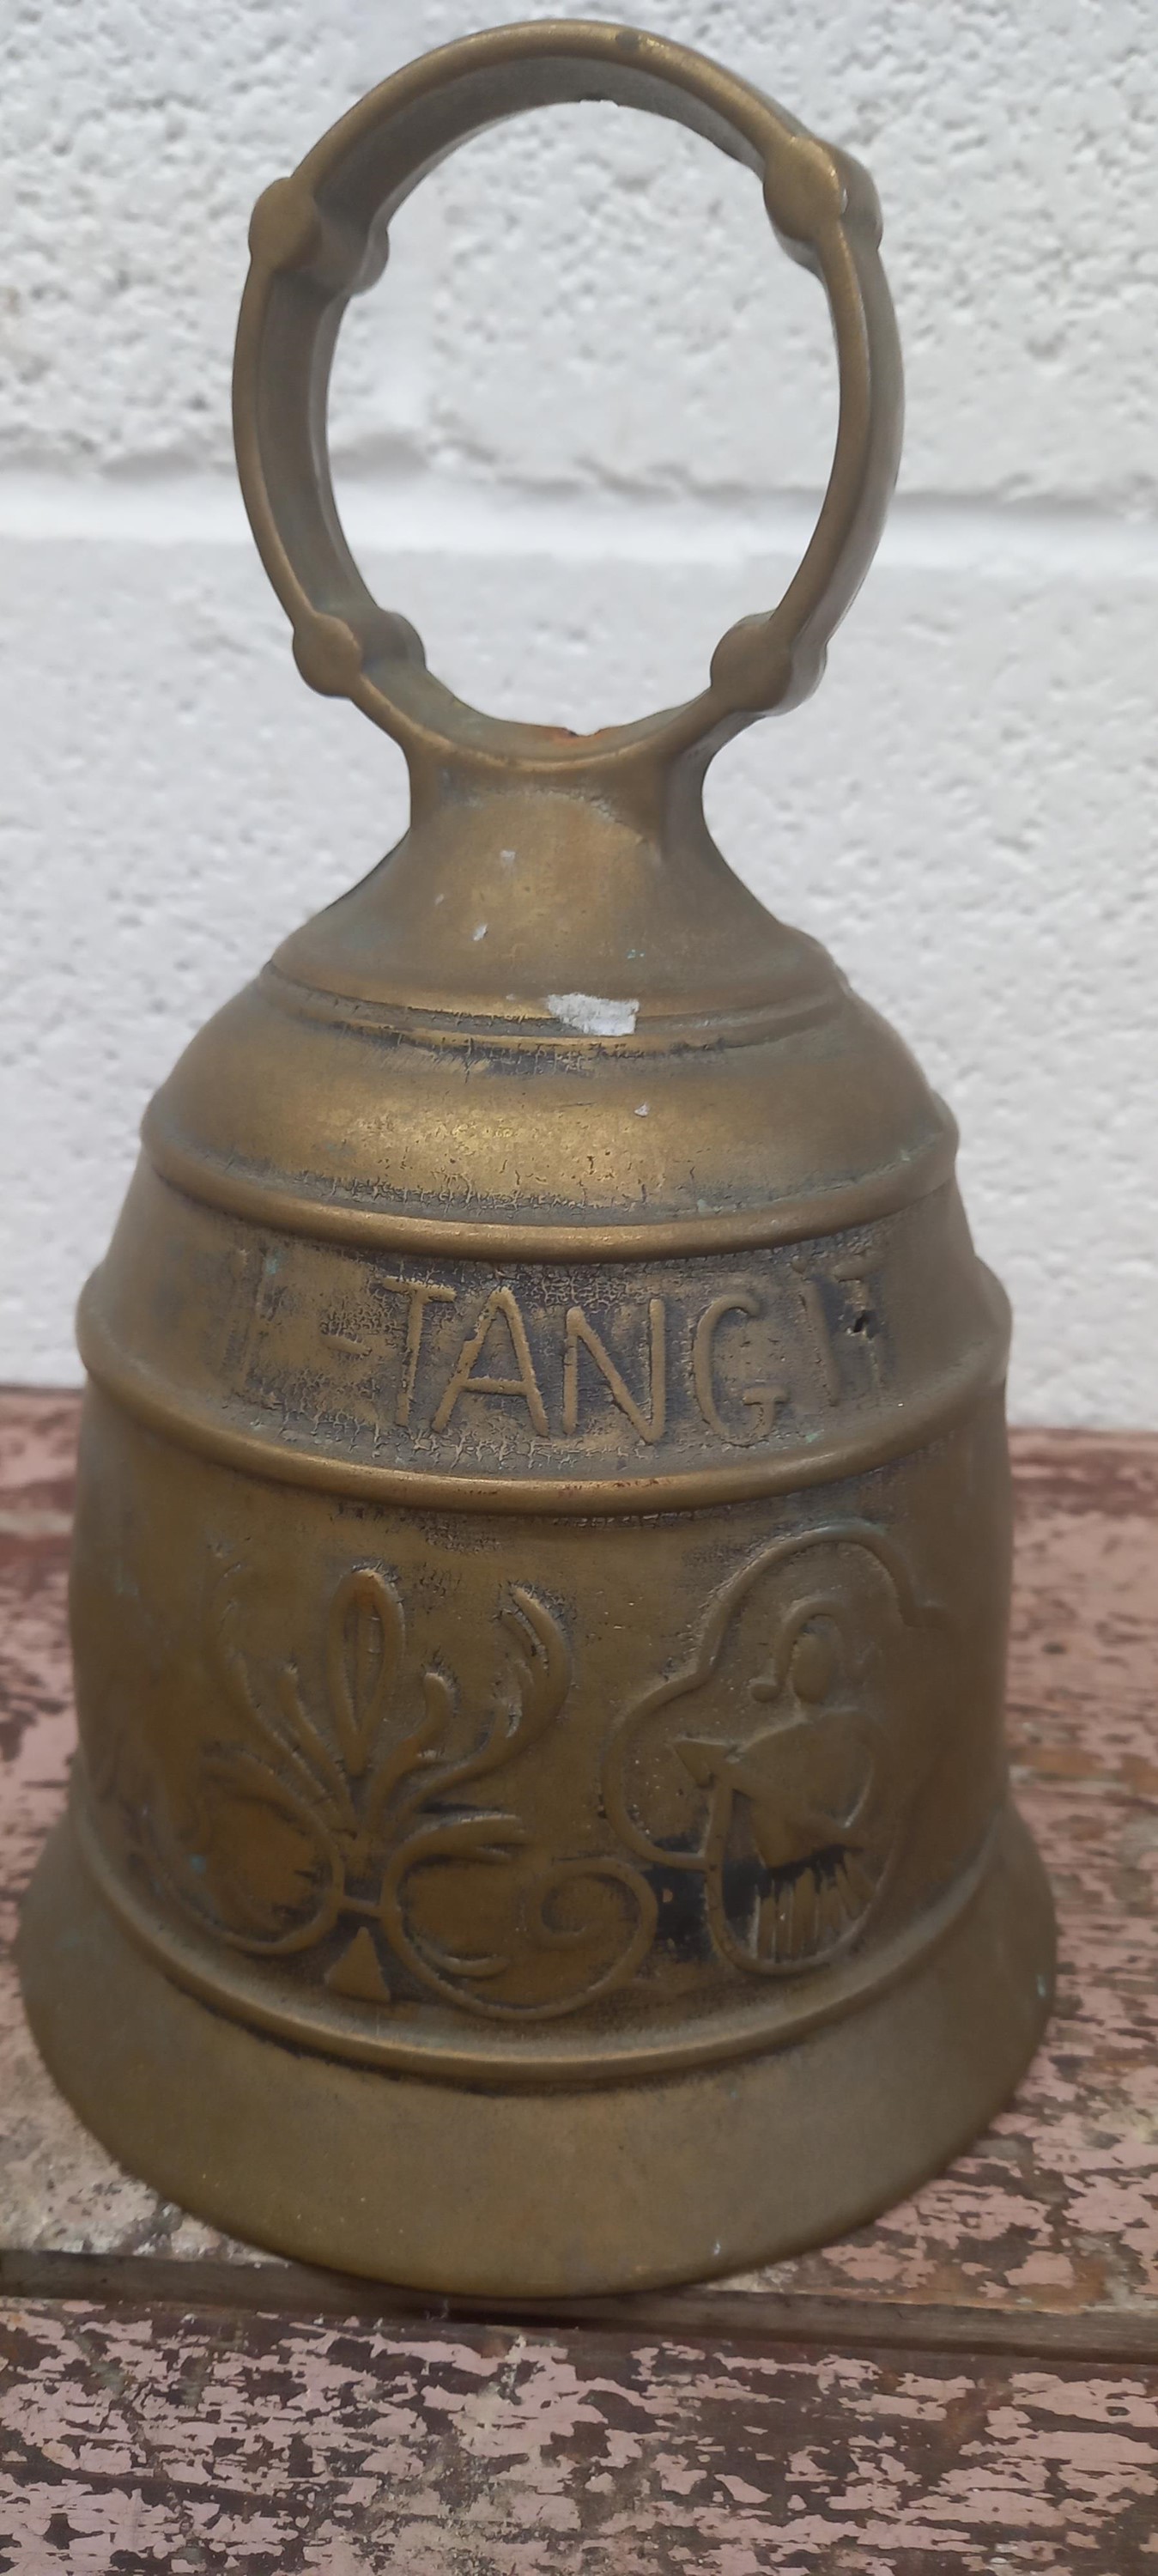 Lot 97 A brass bell with a Latin inscription. The